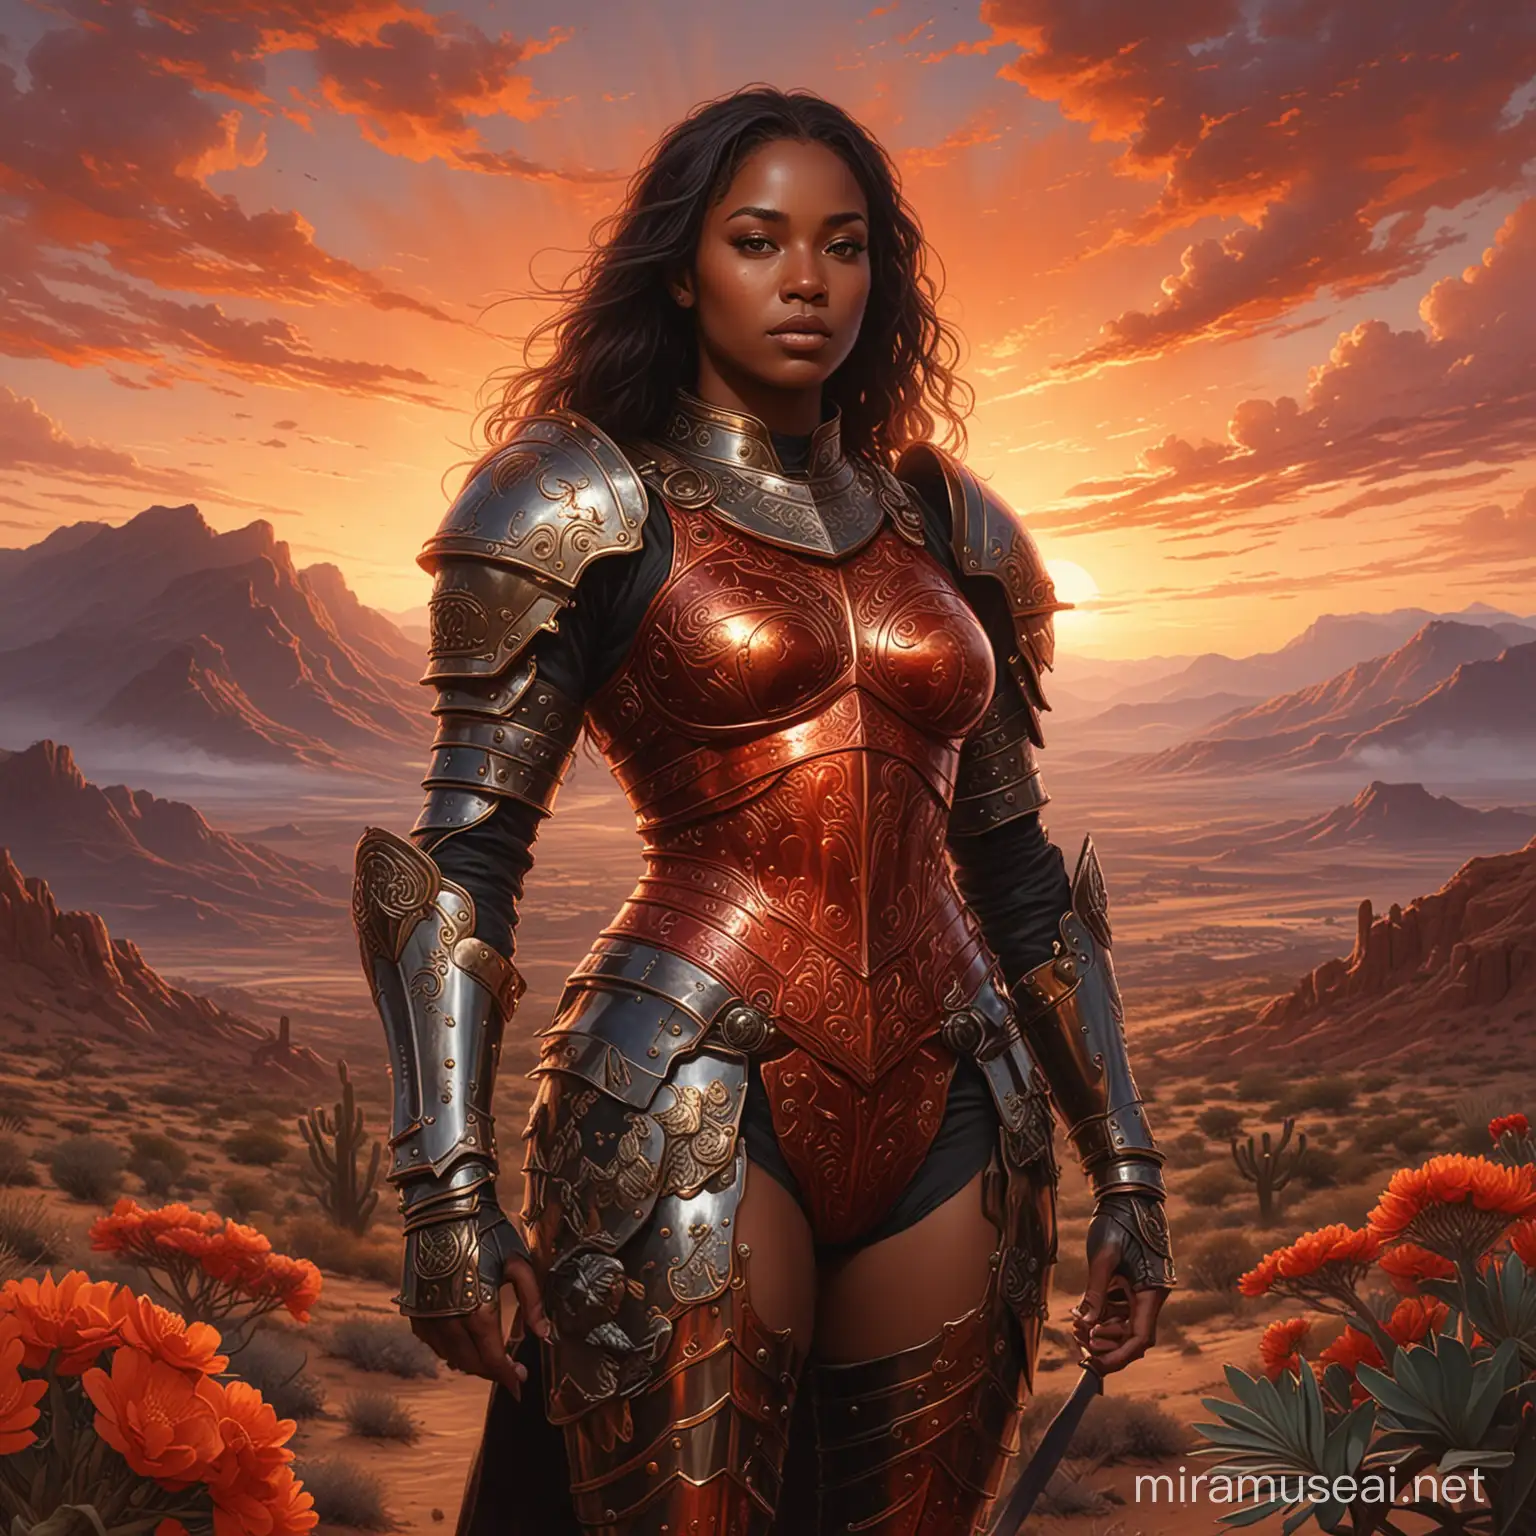 Majestic Desert Sunset Landscape with ArmorClad Knight and Graceful Woman